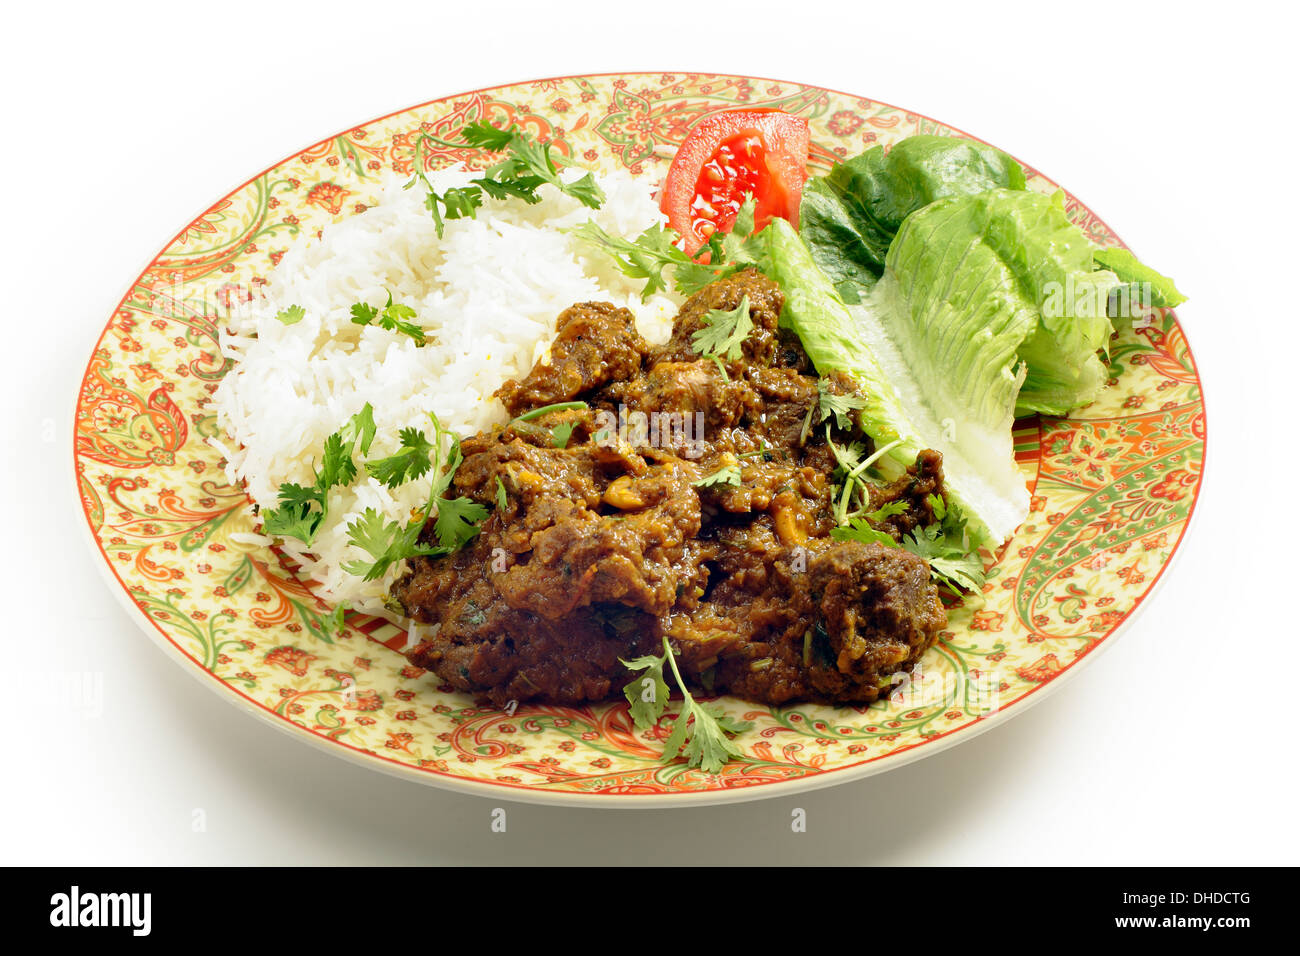 North Indian or Pakistani style bhuna ghosht, a fairly dry lamb curry, served with rice and a salad Stock Photo